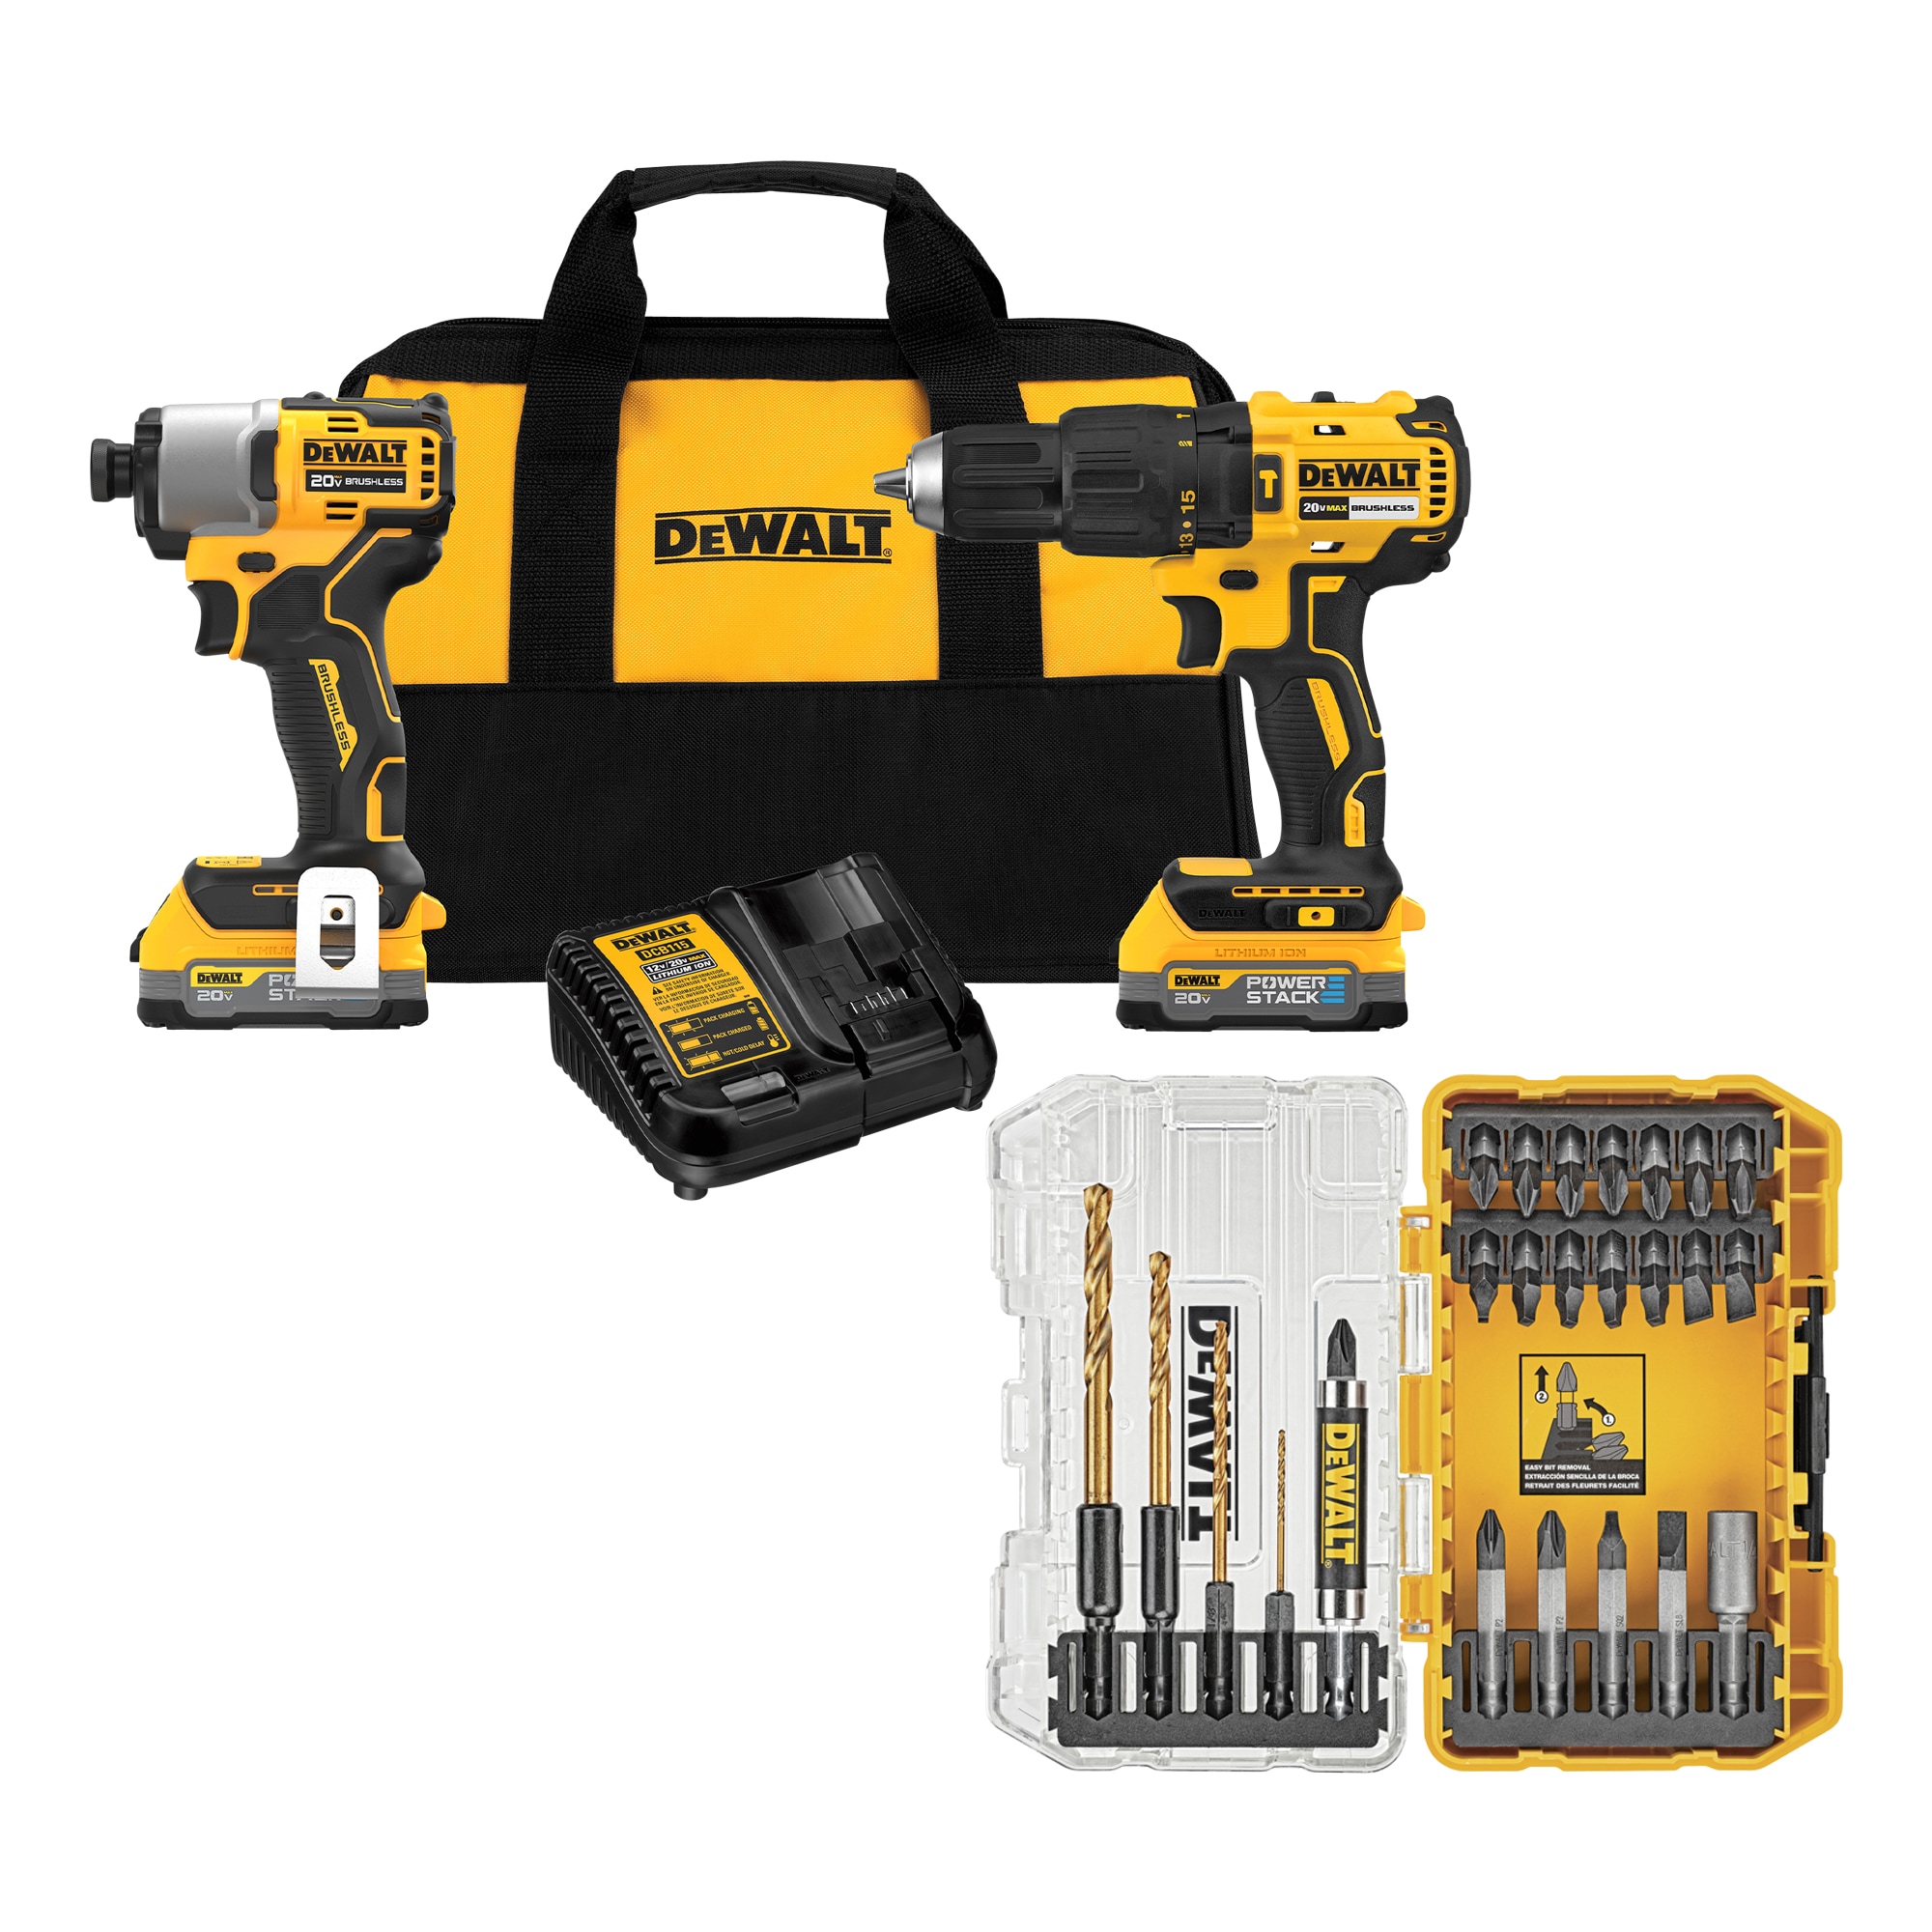 DEWALT 20V MAX Brushless Cordless Hammer Drill/Driver and Impact Driver Combo Kit with POWERSTACK Compact Batteries & TOUGH GRIP Set Steel Hex Shank